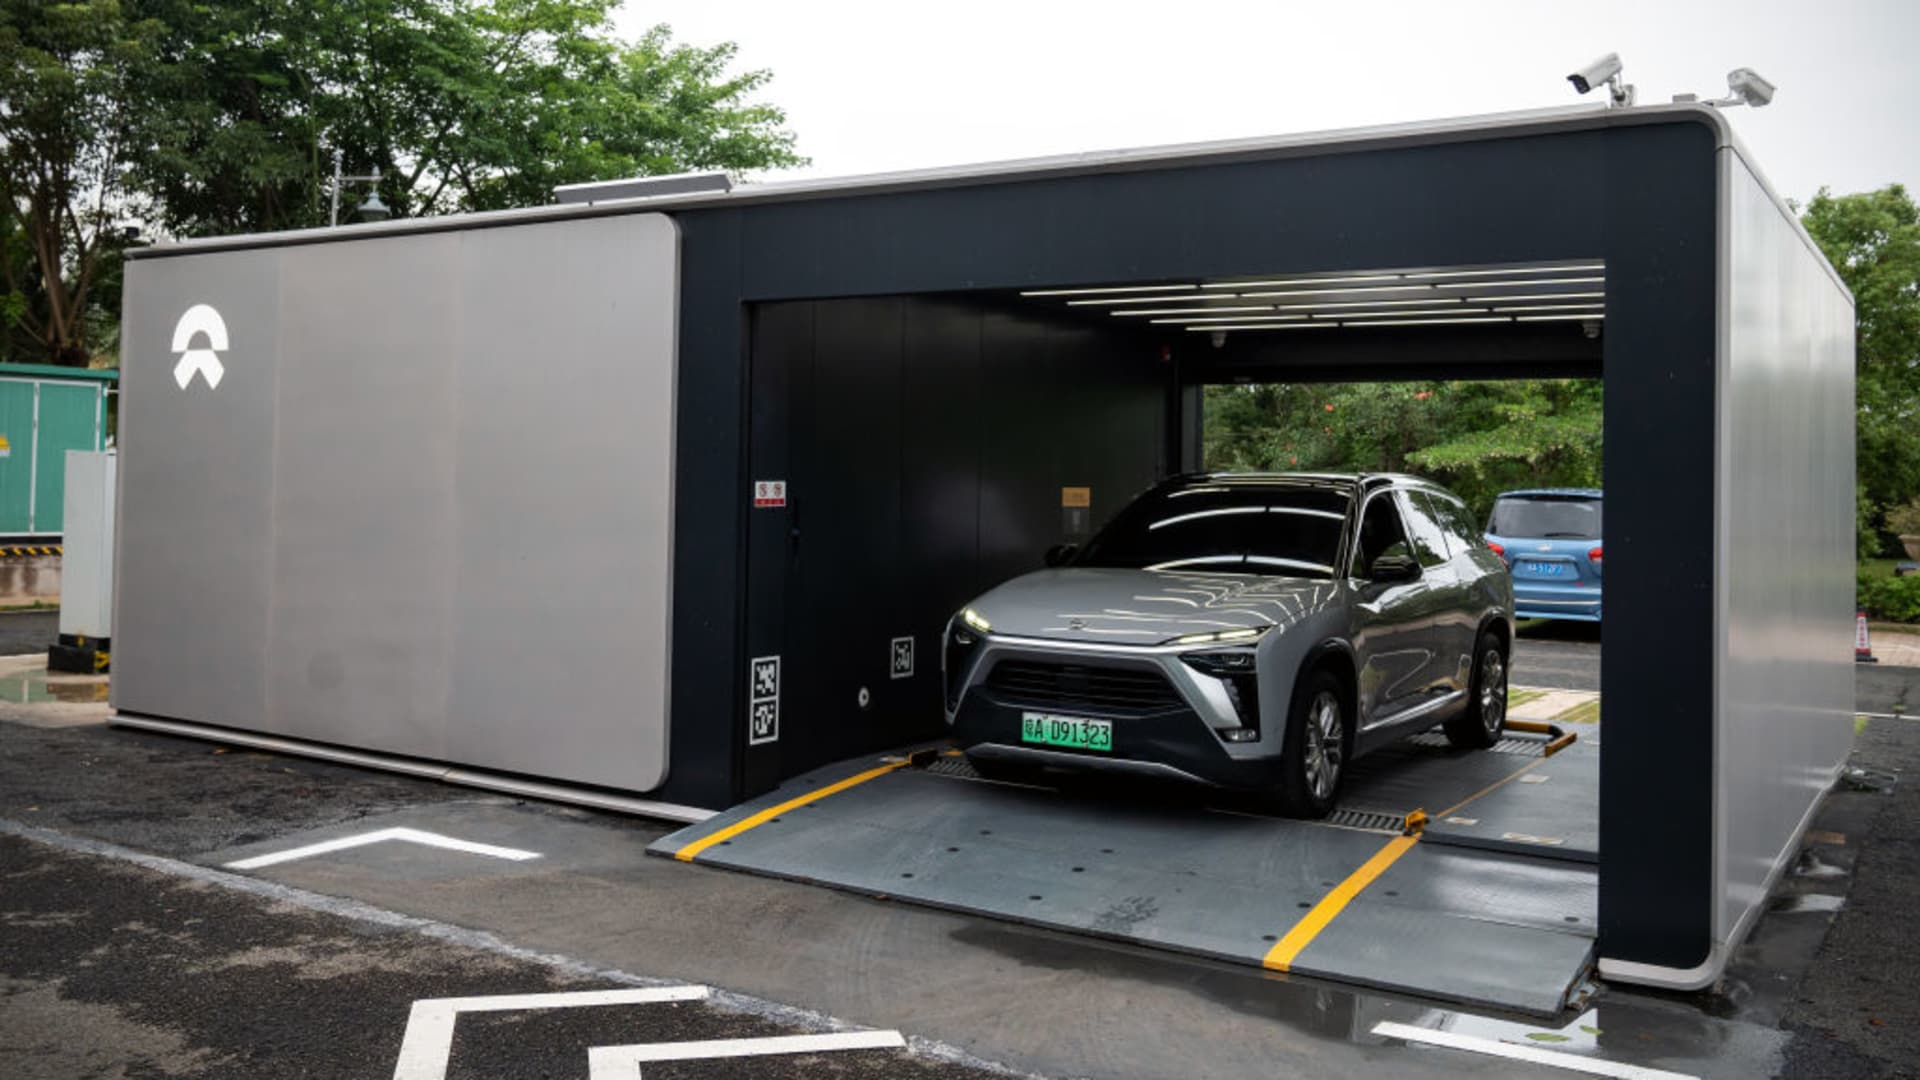 China's Nio to expand battery swap services to gain an edge on EV infrastructure